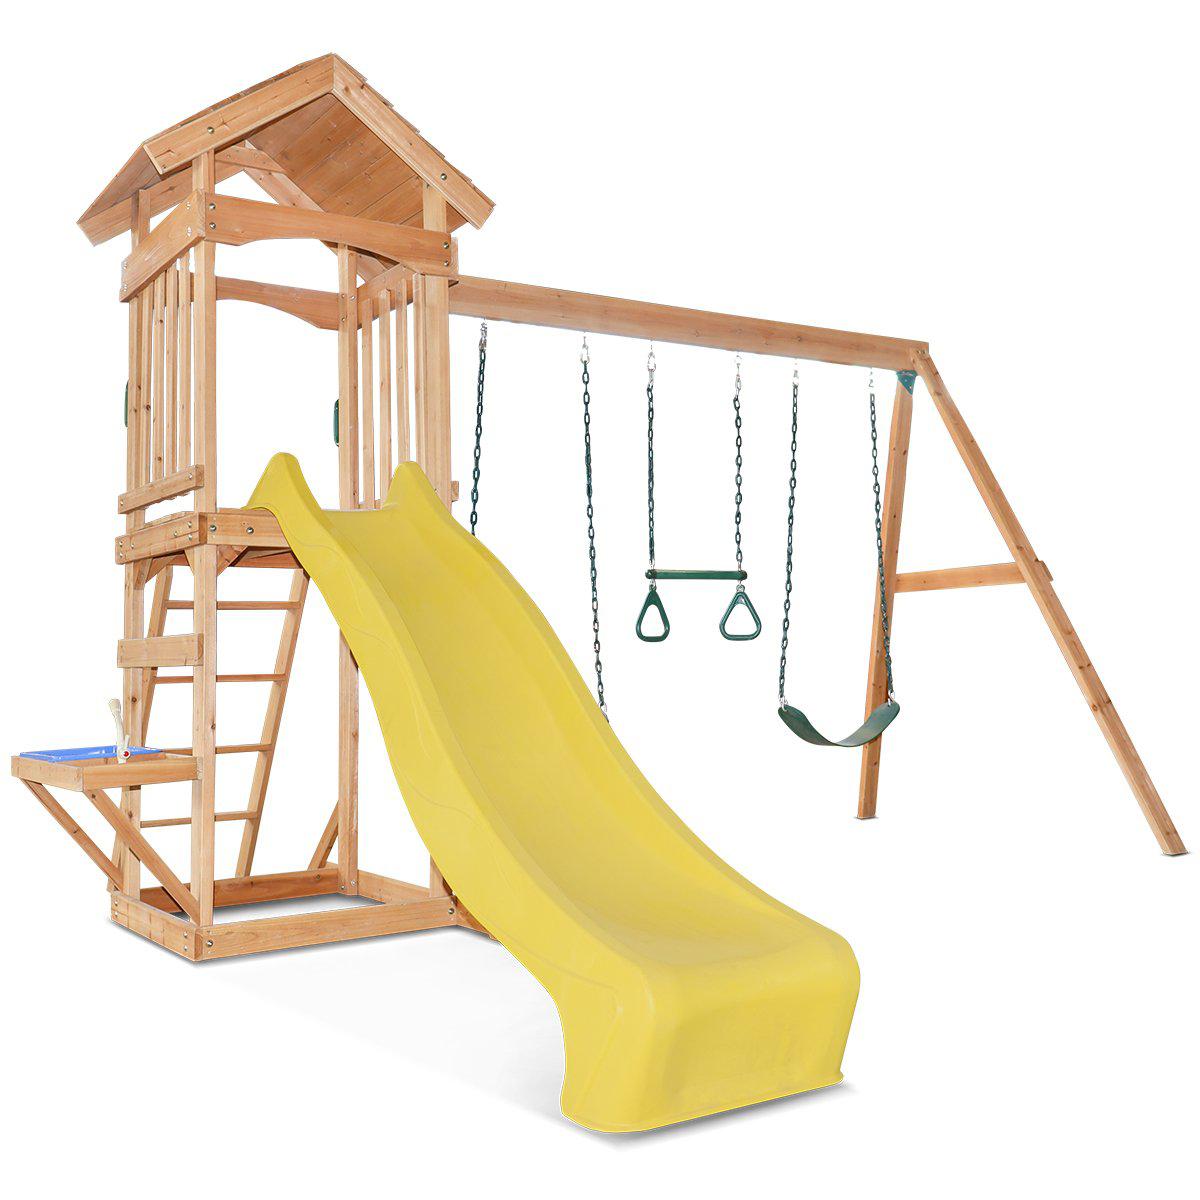 Shop Albert Park Play Centre with Slide: Active Outdoor Fun for Kids